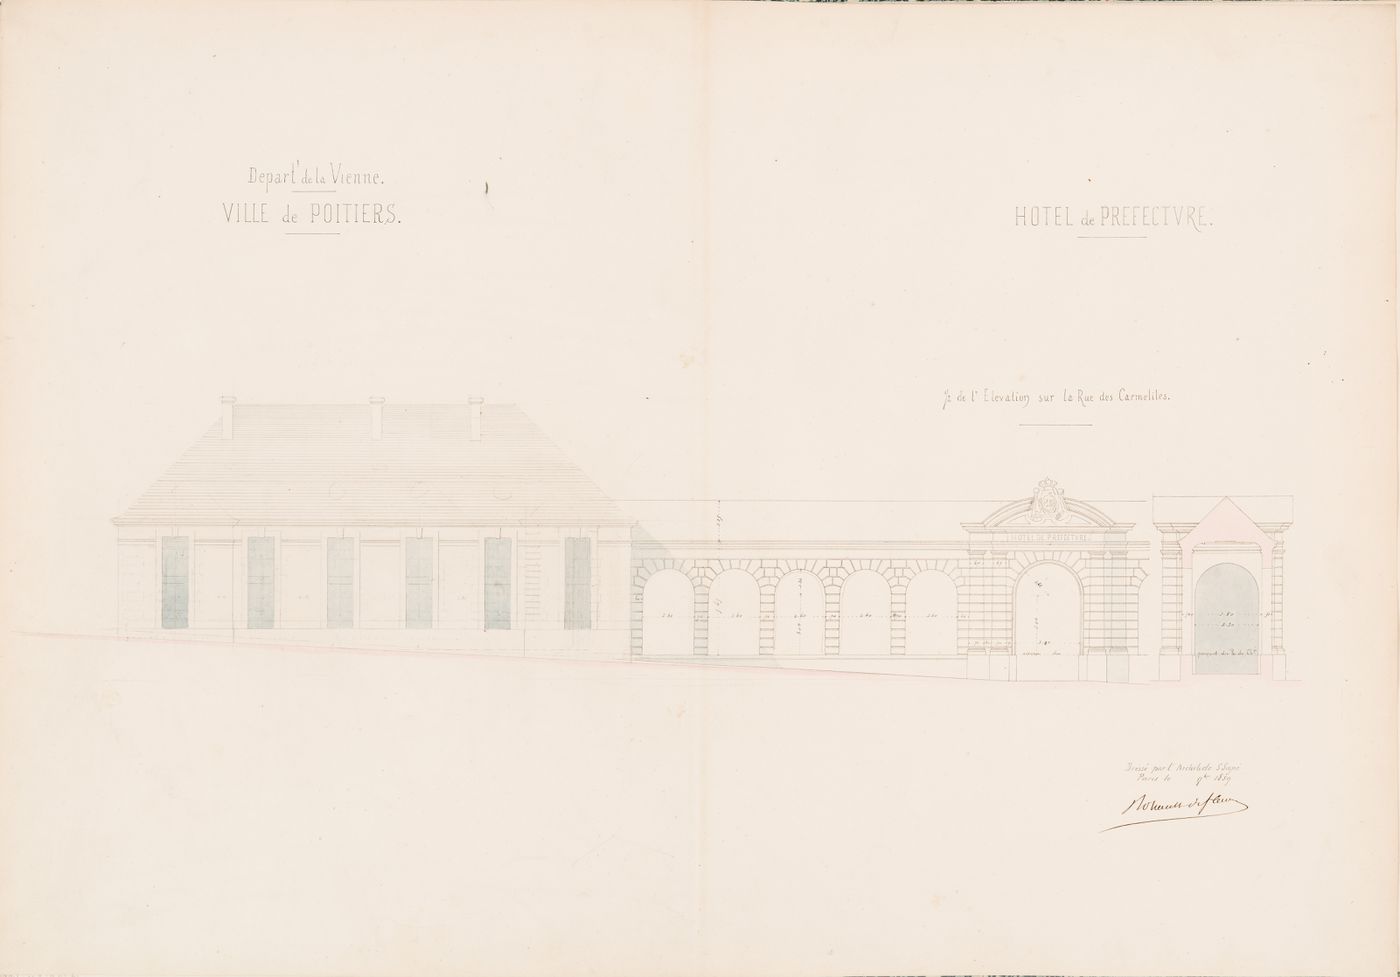 Project for a Hôtel de préfecture, Poitiers: Partial front elevation showing the guardroom, academy, portico, and entrance, including a cross section through the entrance, rue des Carmelites